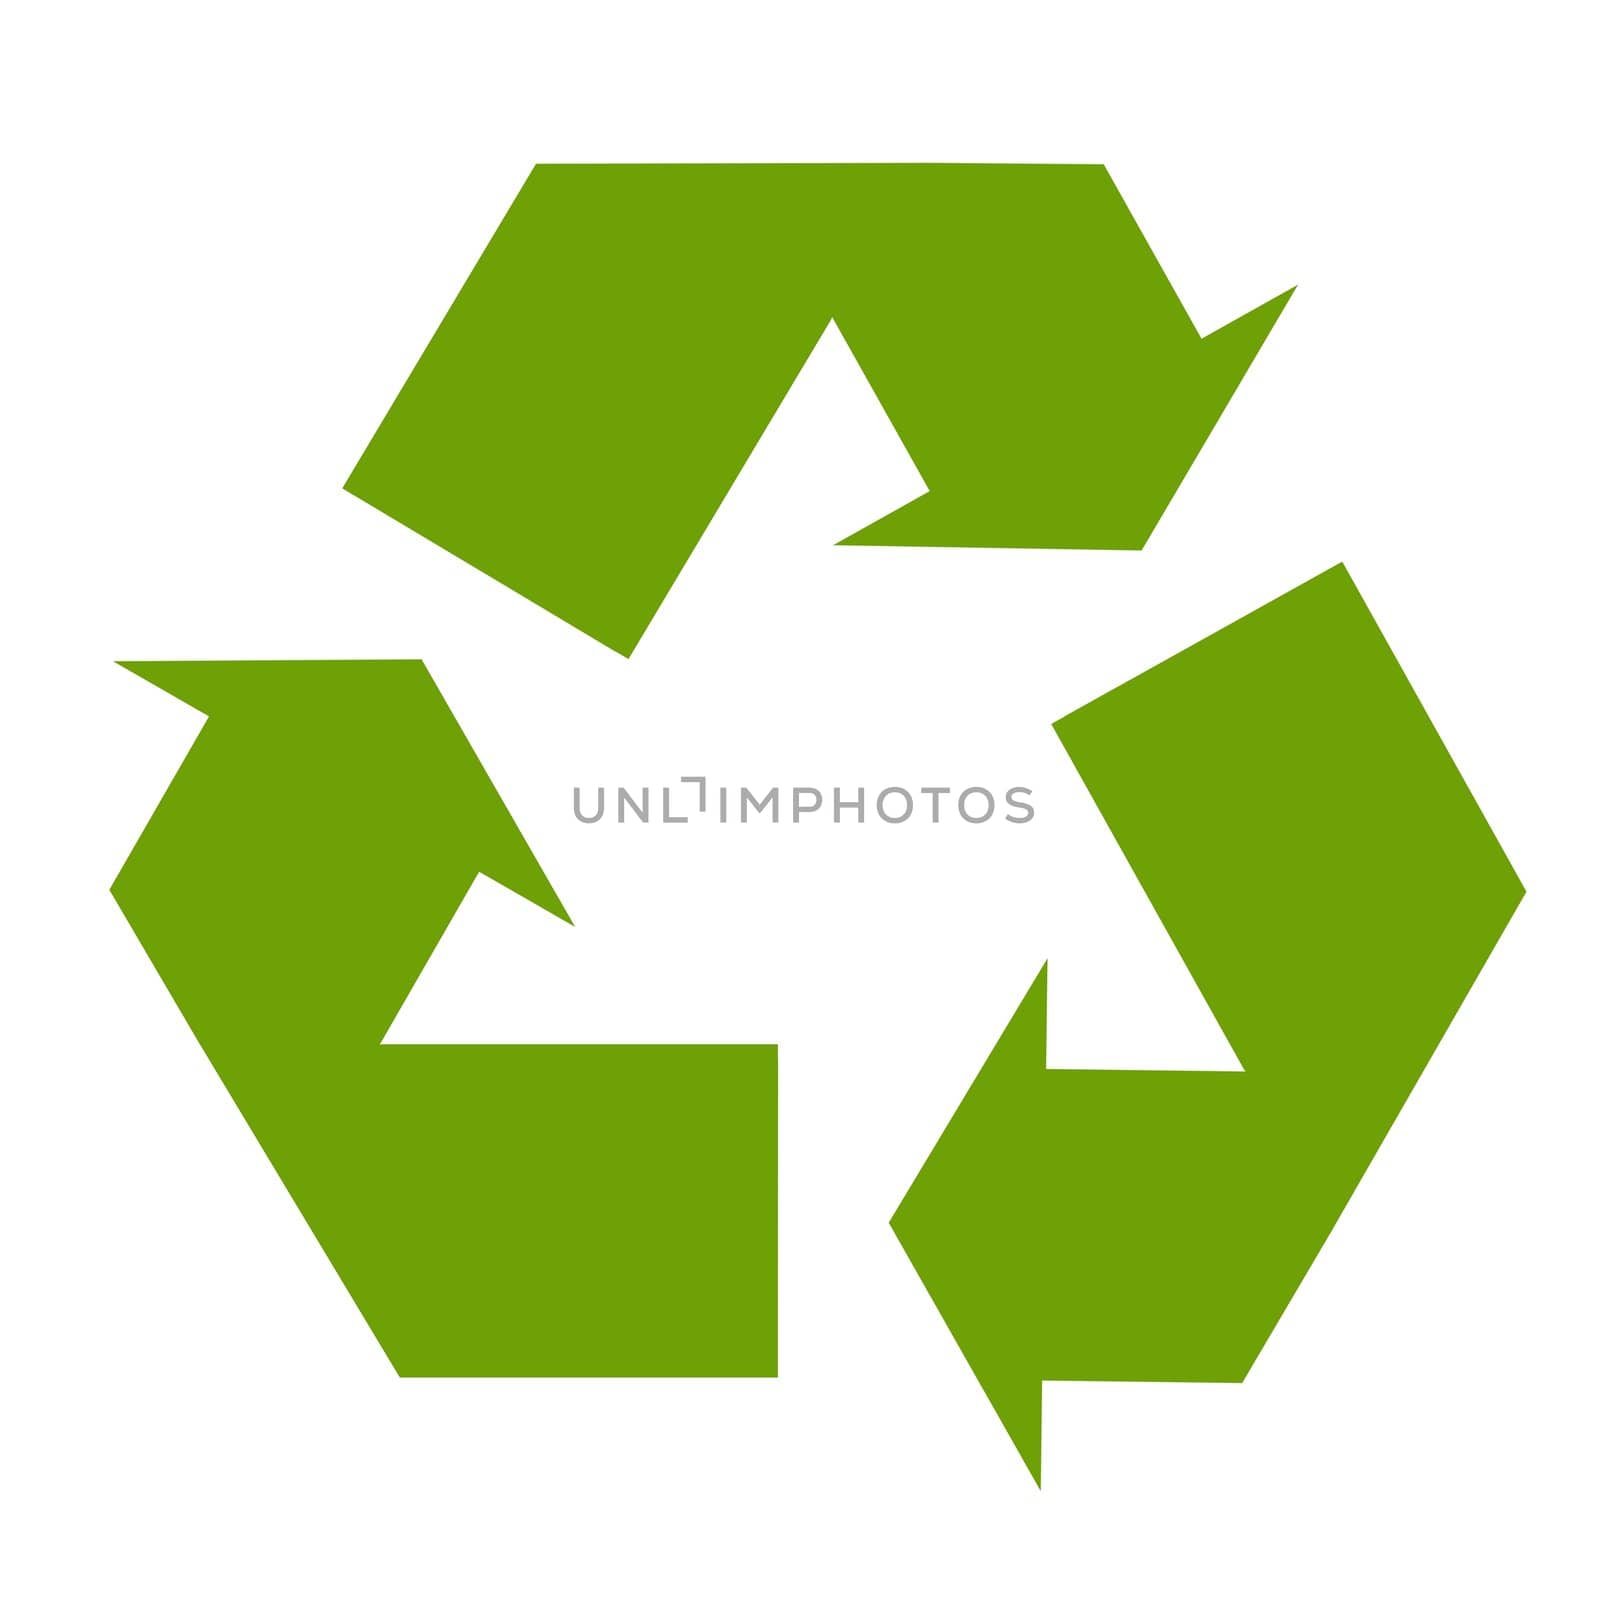 Recycle green symbol illustration, ecology, conservation, planet